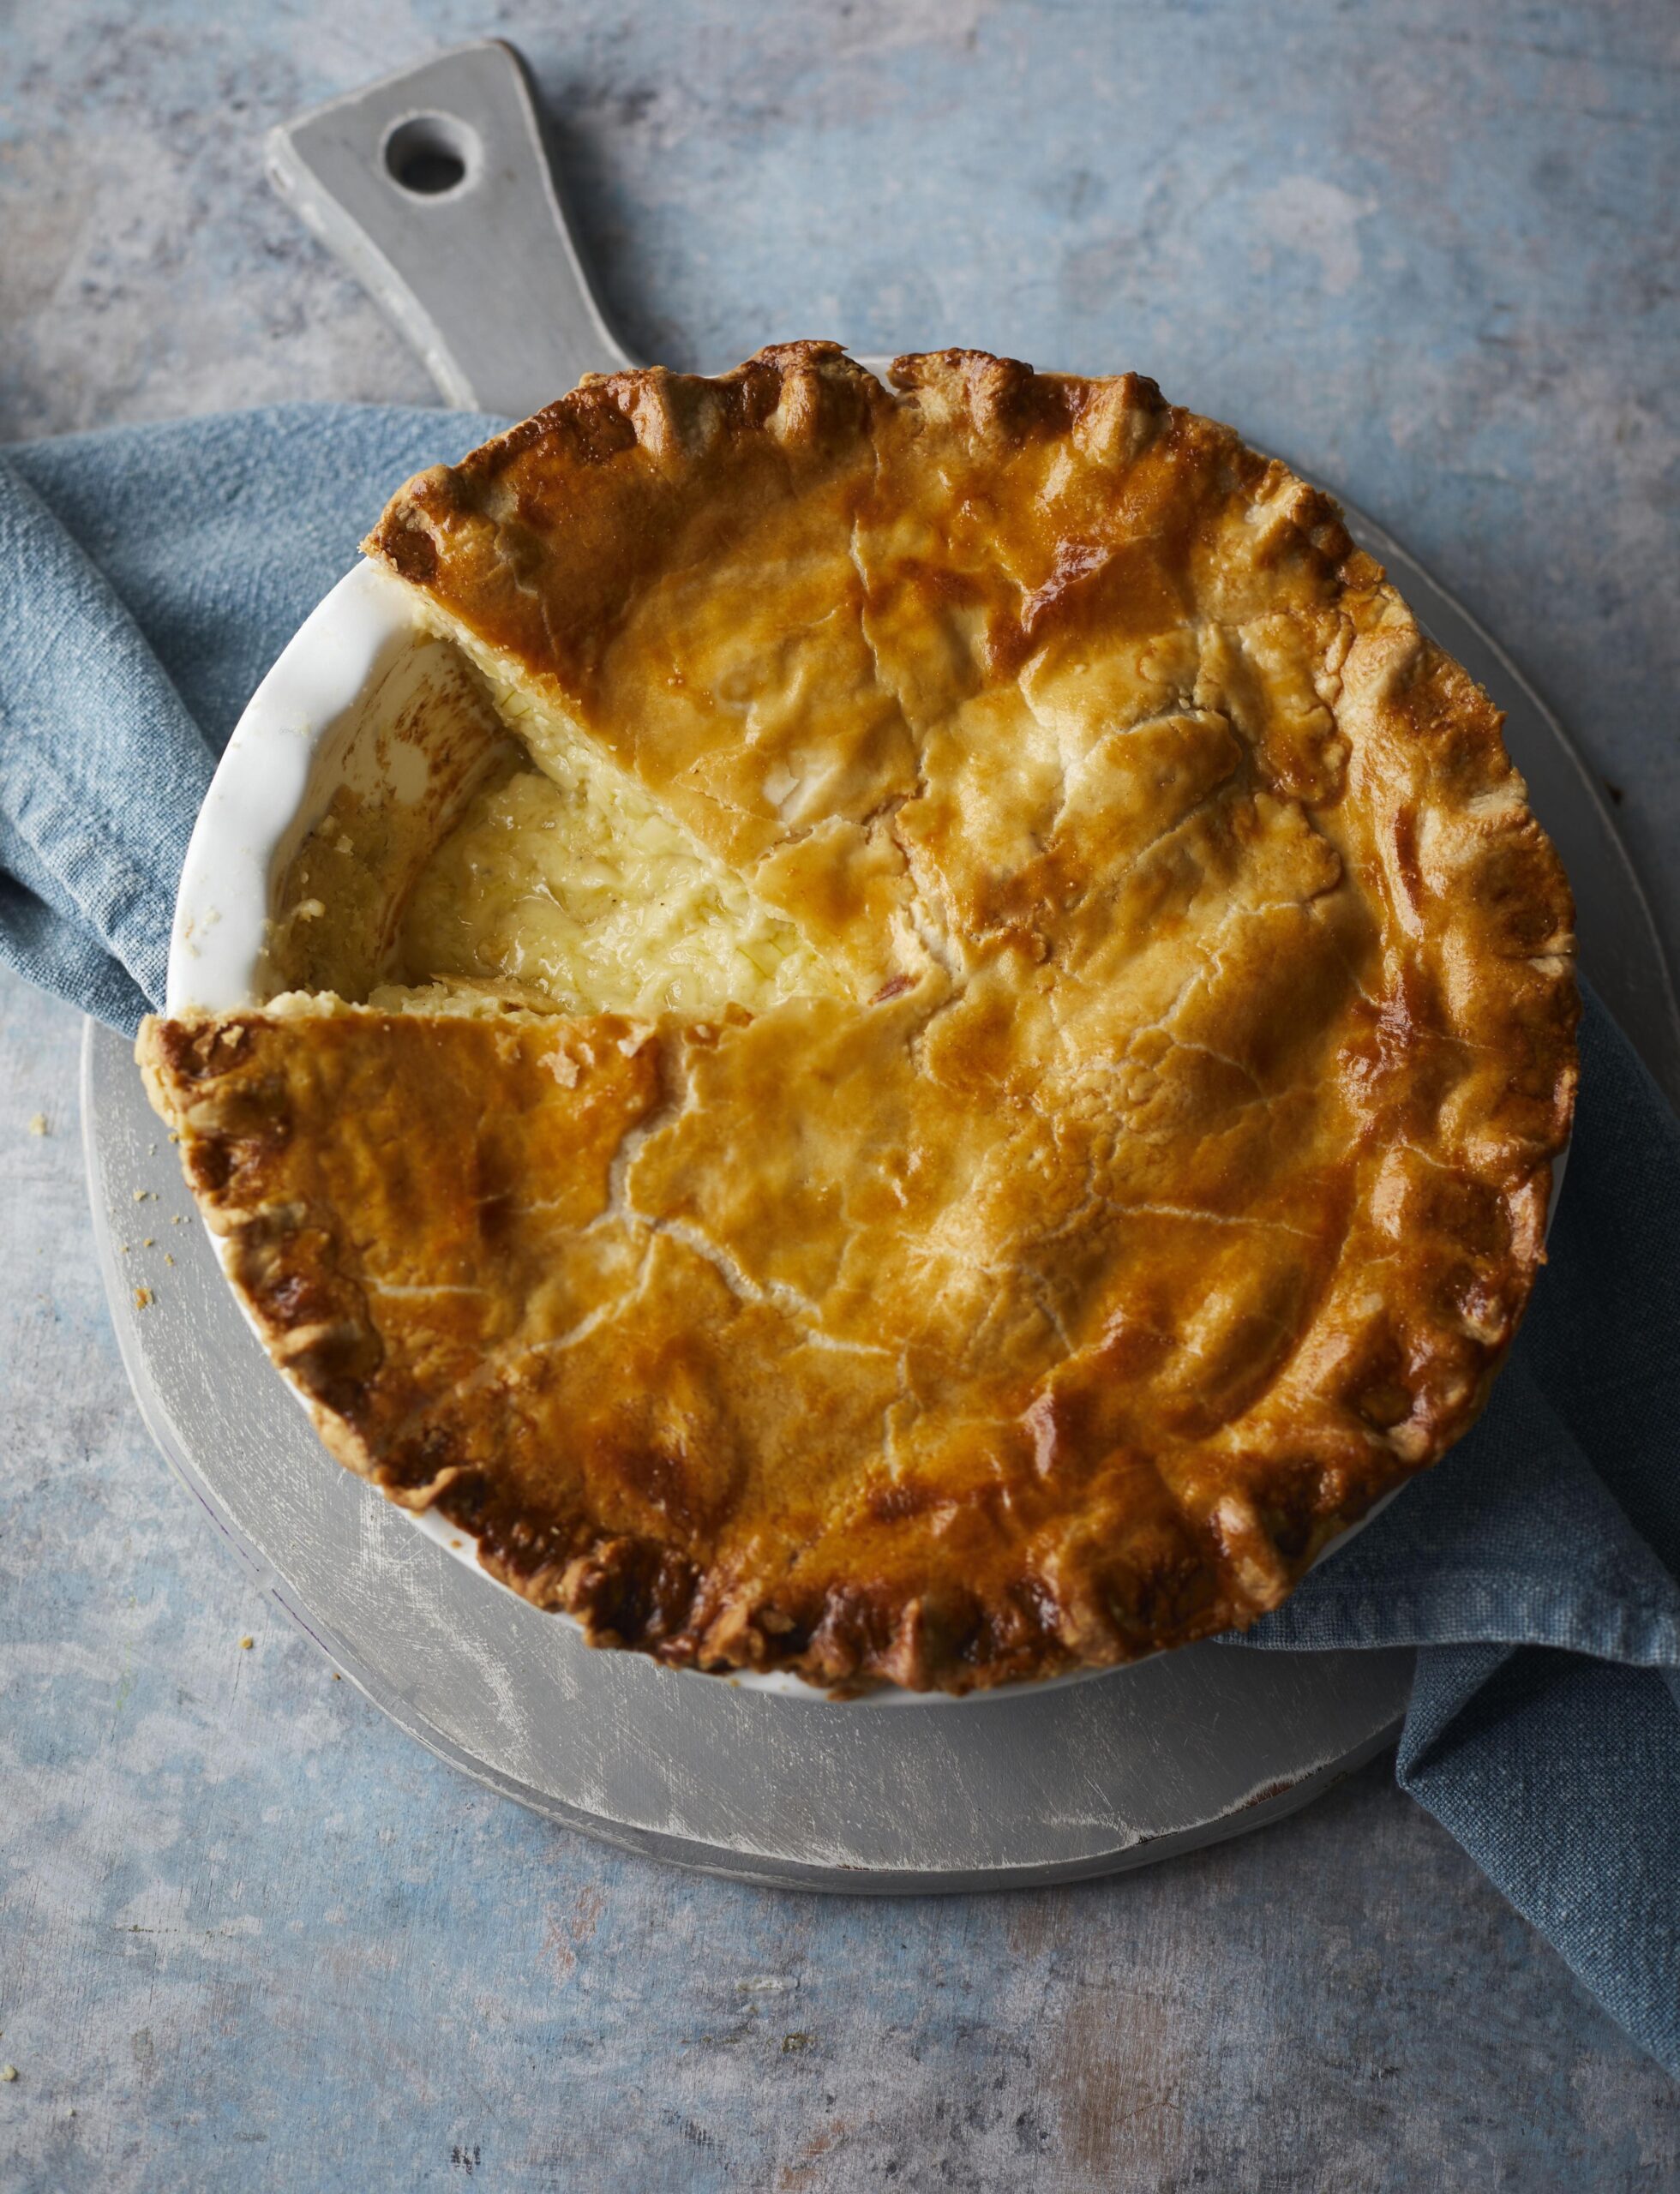  A golden-baked crust and a rich, creamy filling - this is English Cheese Pie at its finest.